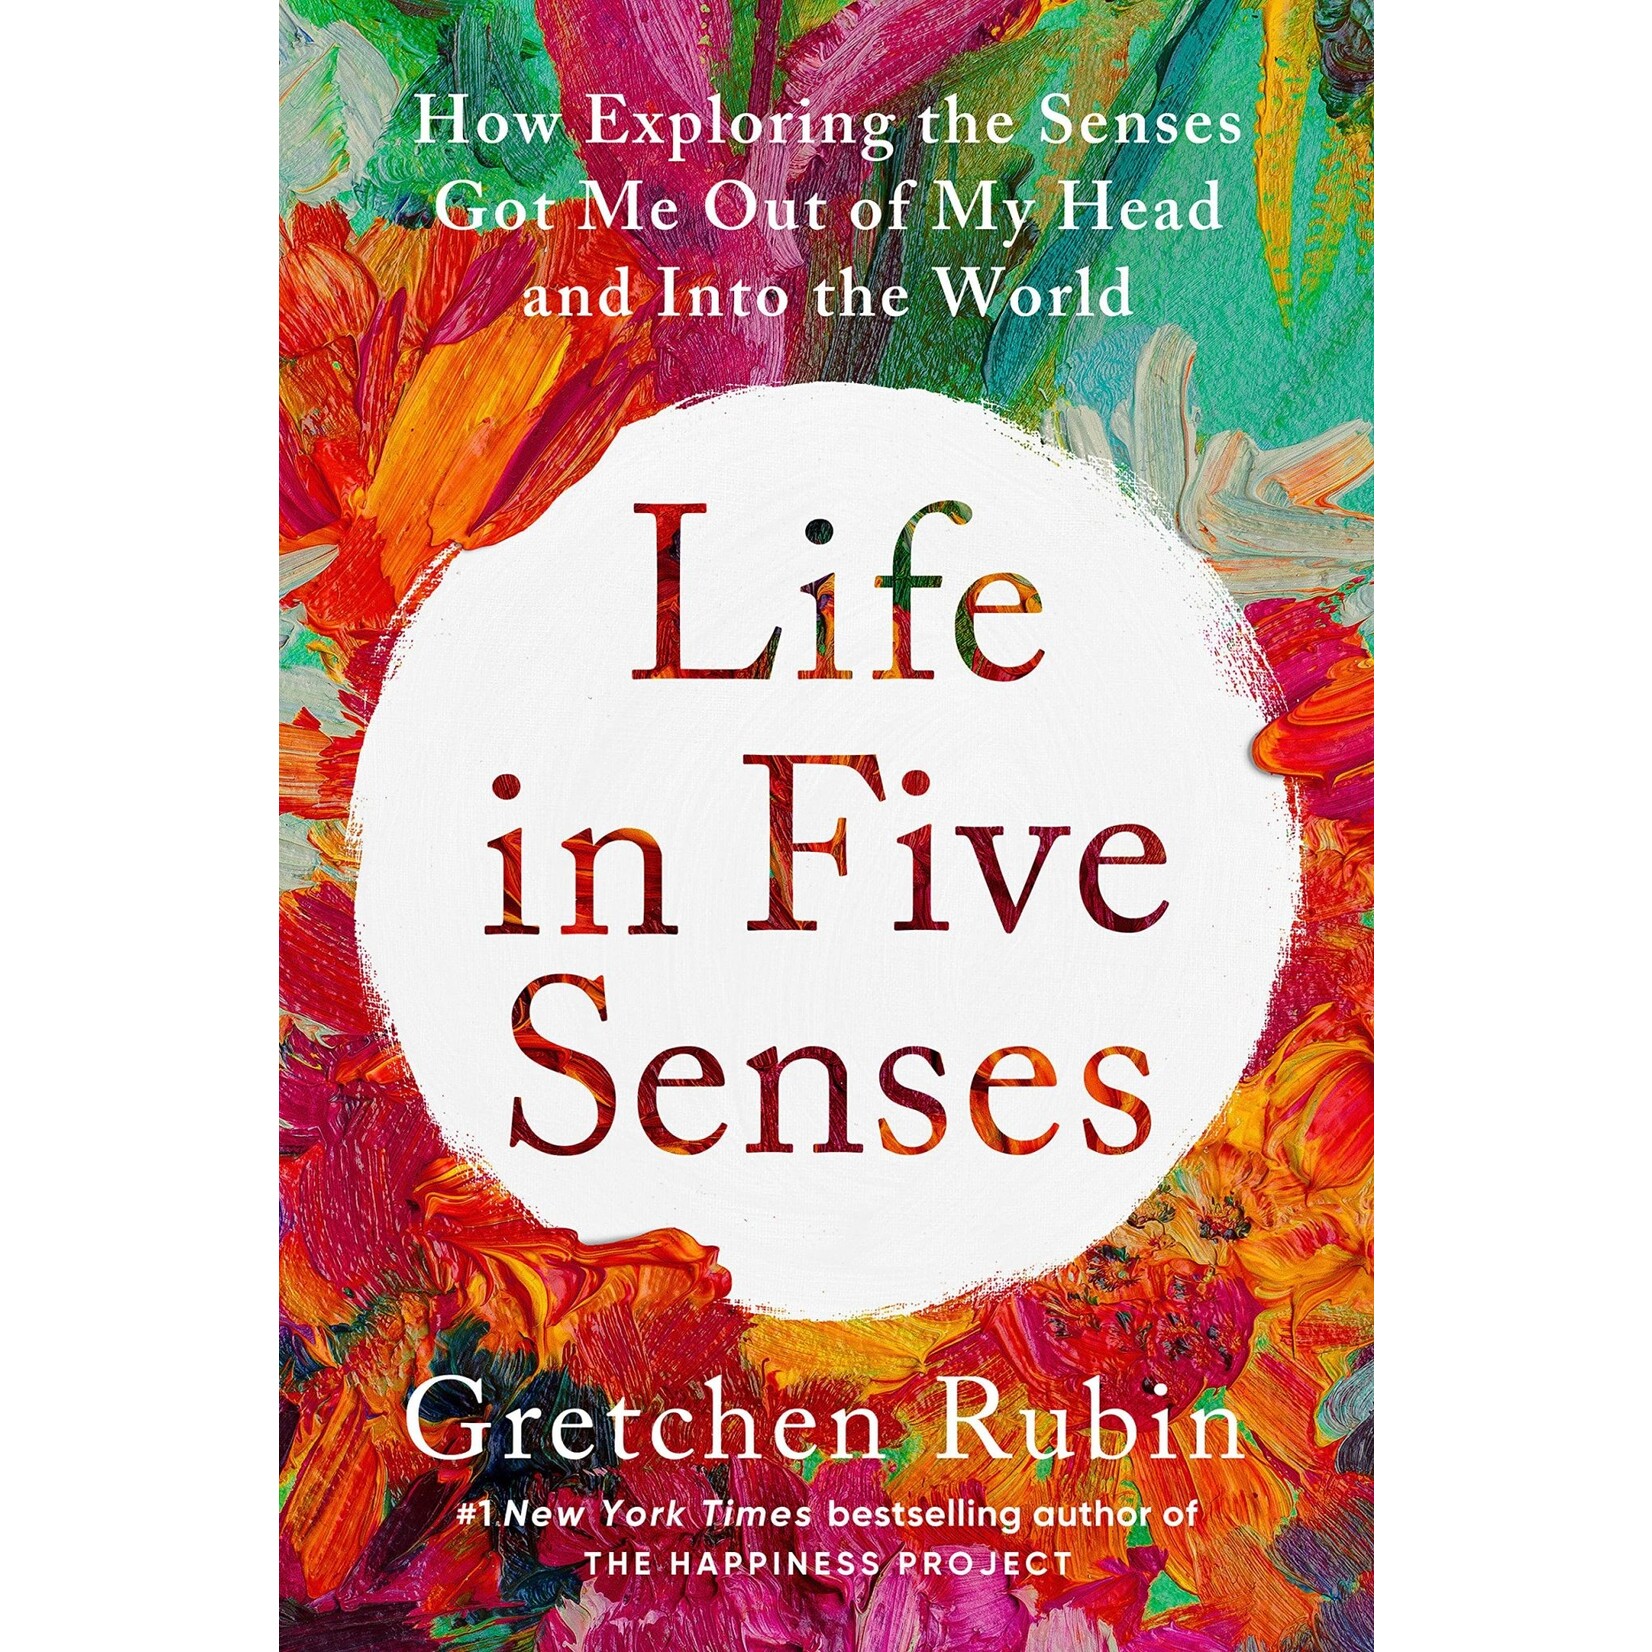 *Life in Five Senses: How Exploring the Senses Got Me Out of My Head and Into the World 4'23 hc